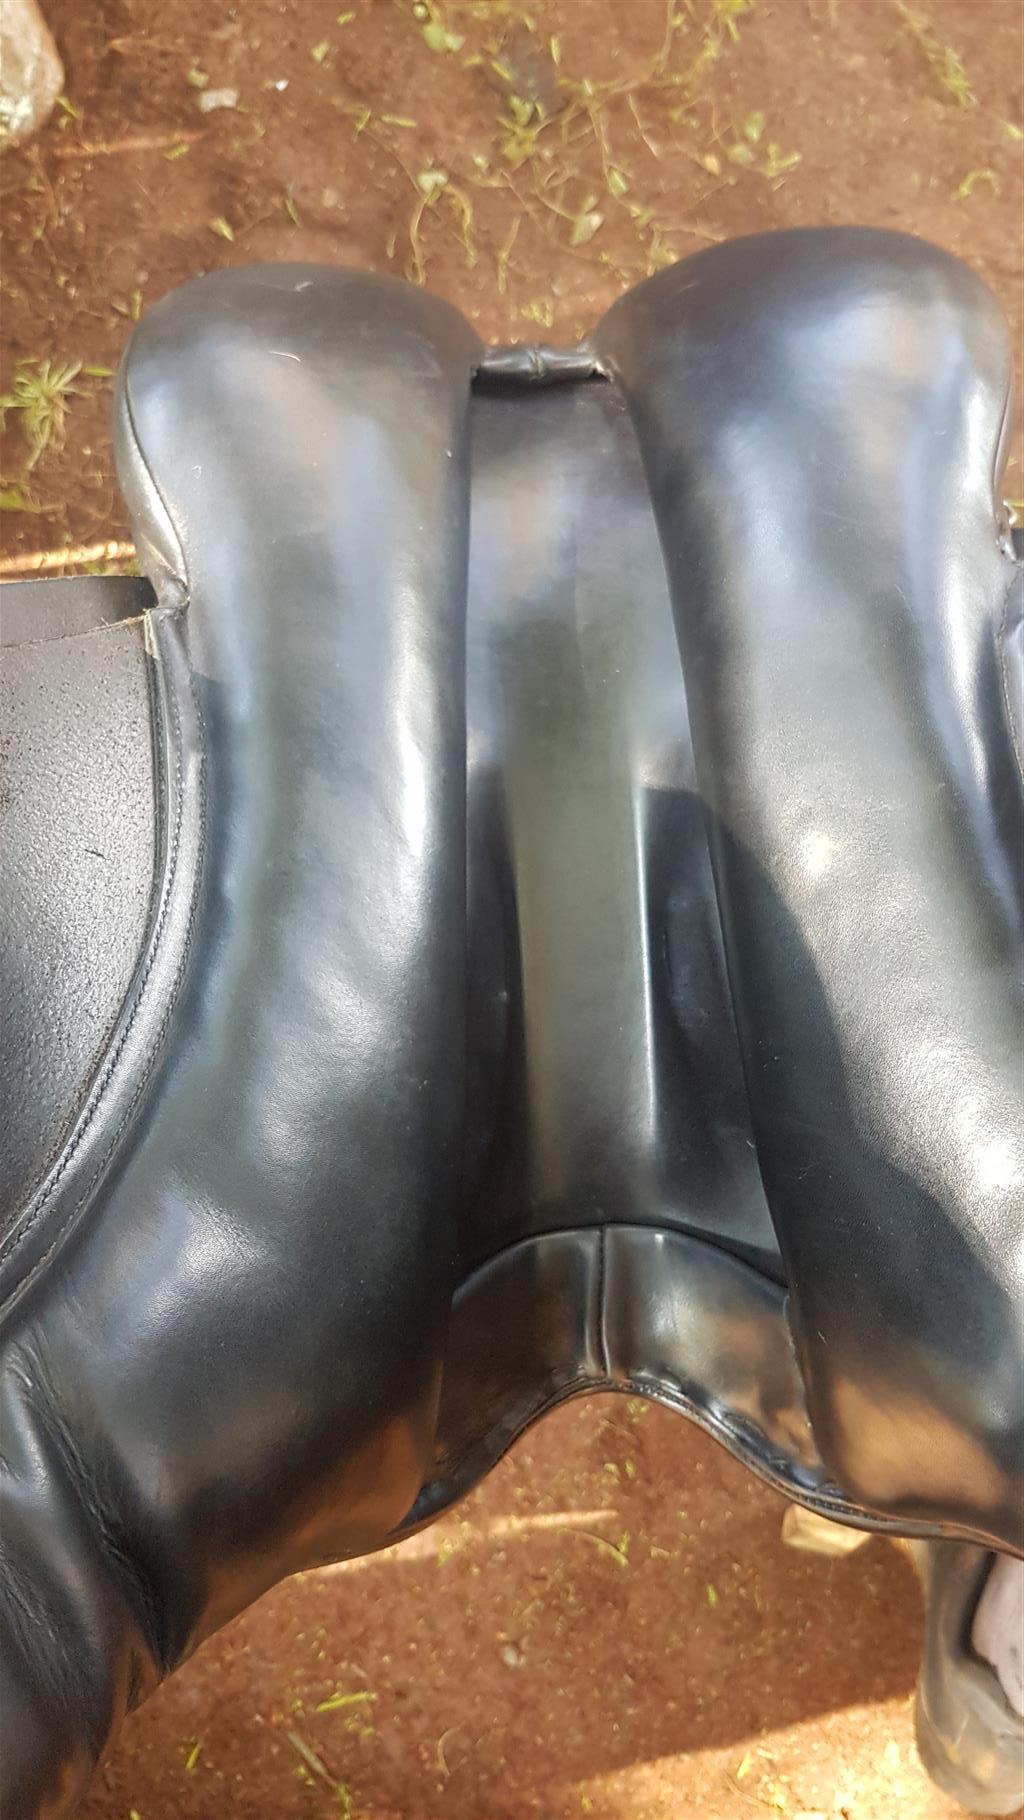 Saddle and bridle for sale